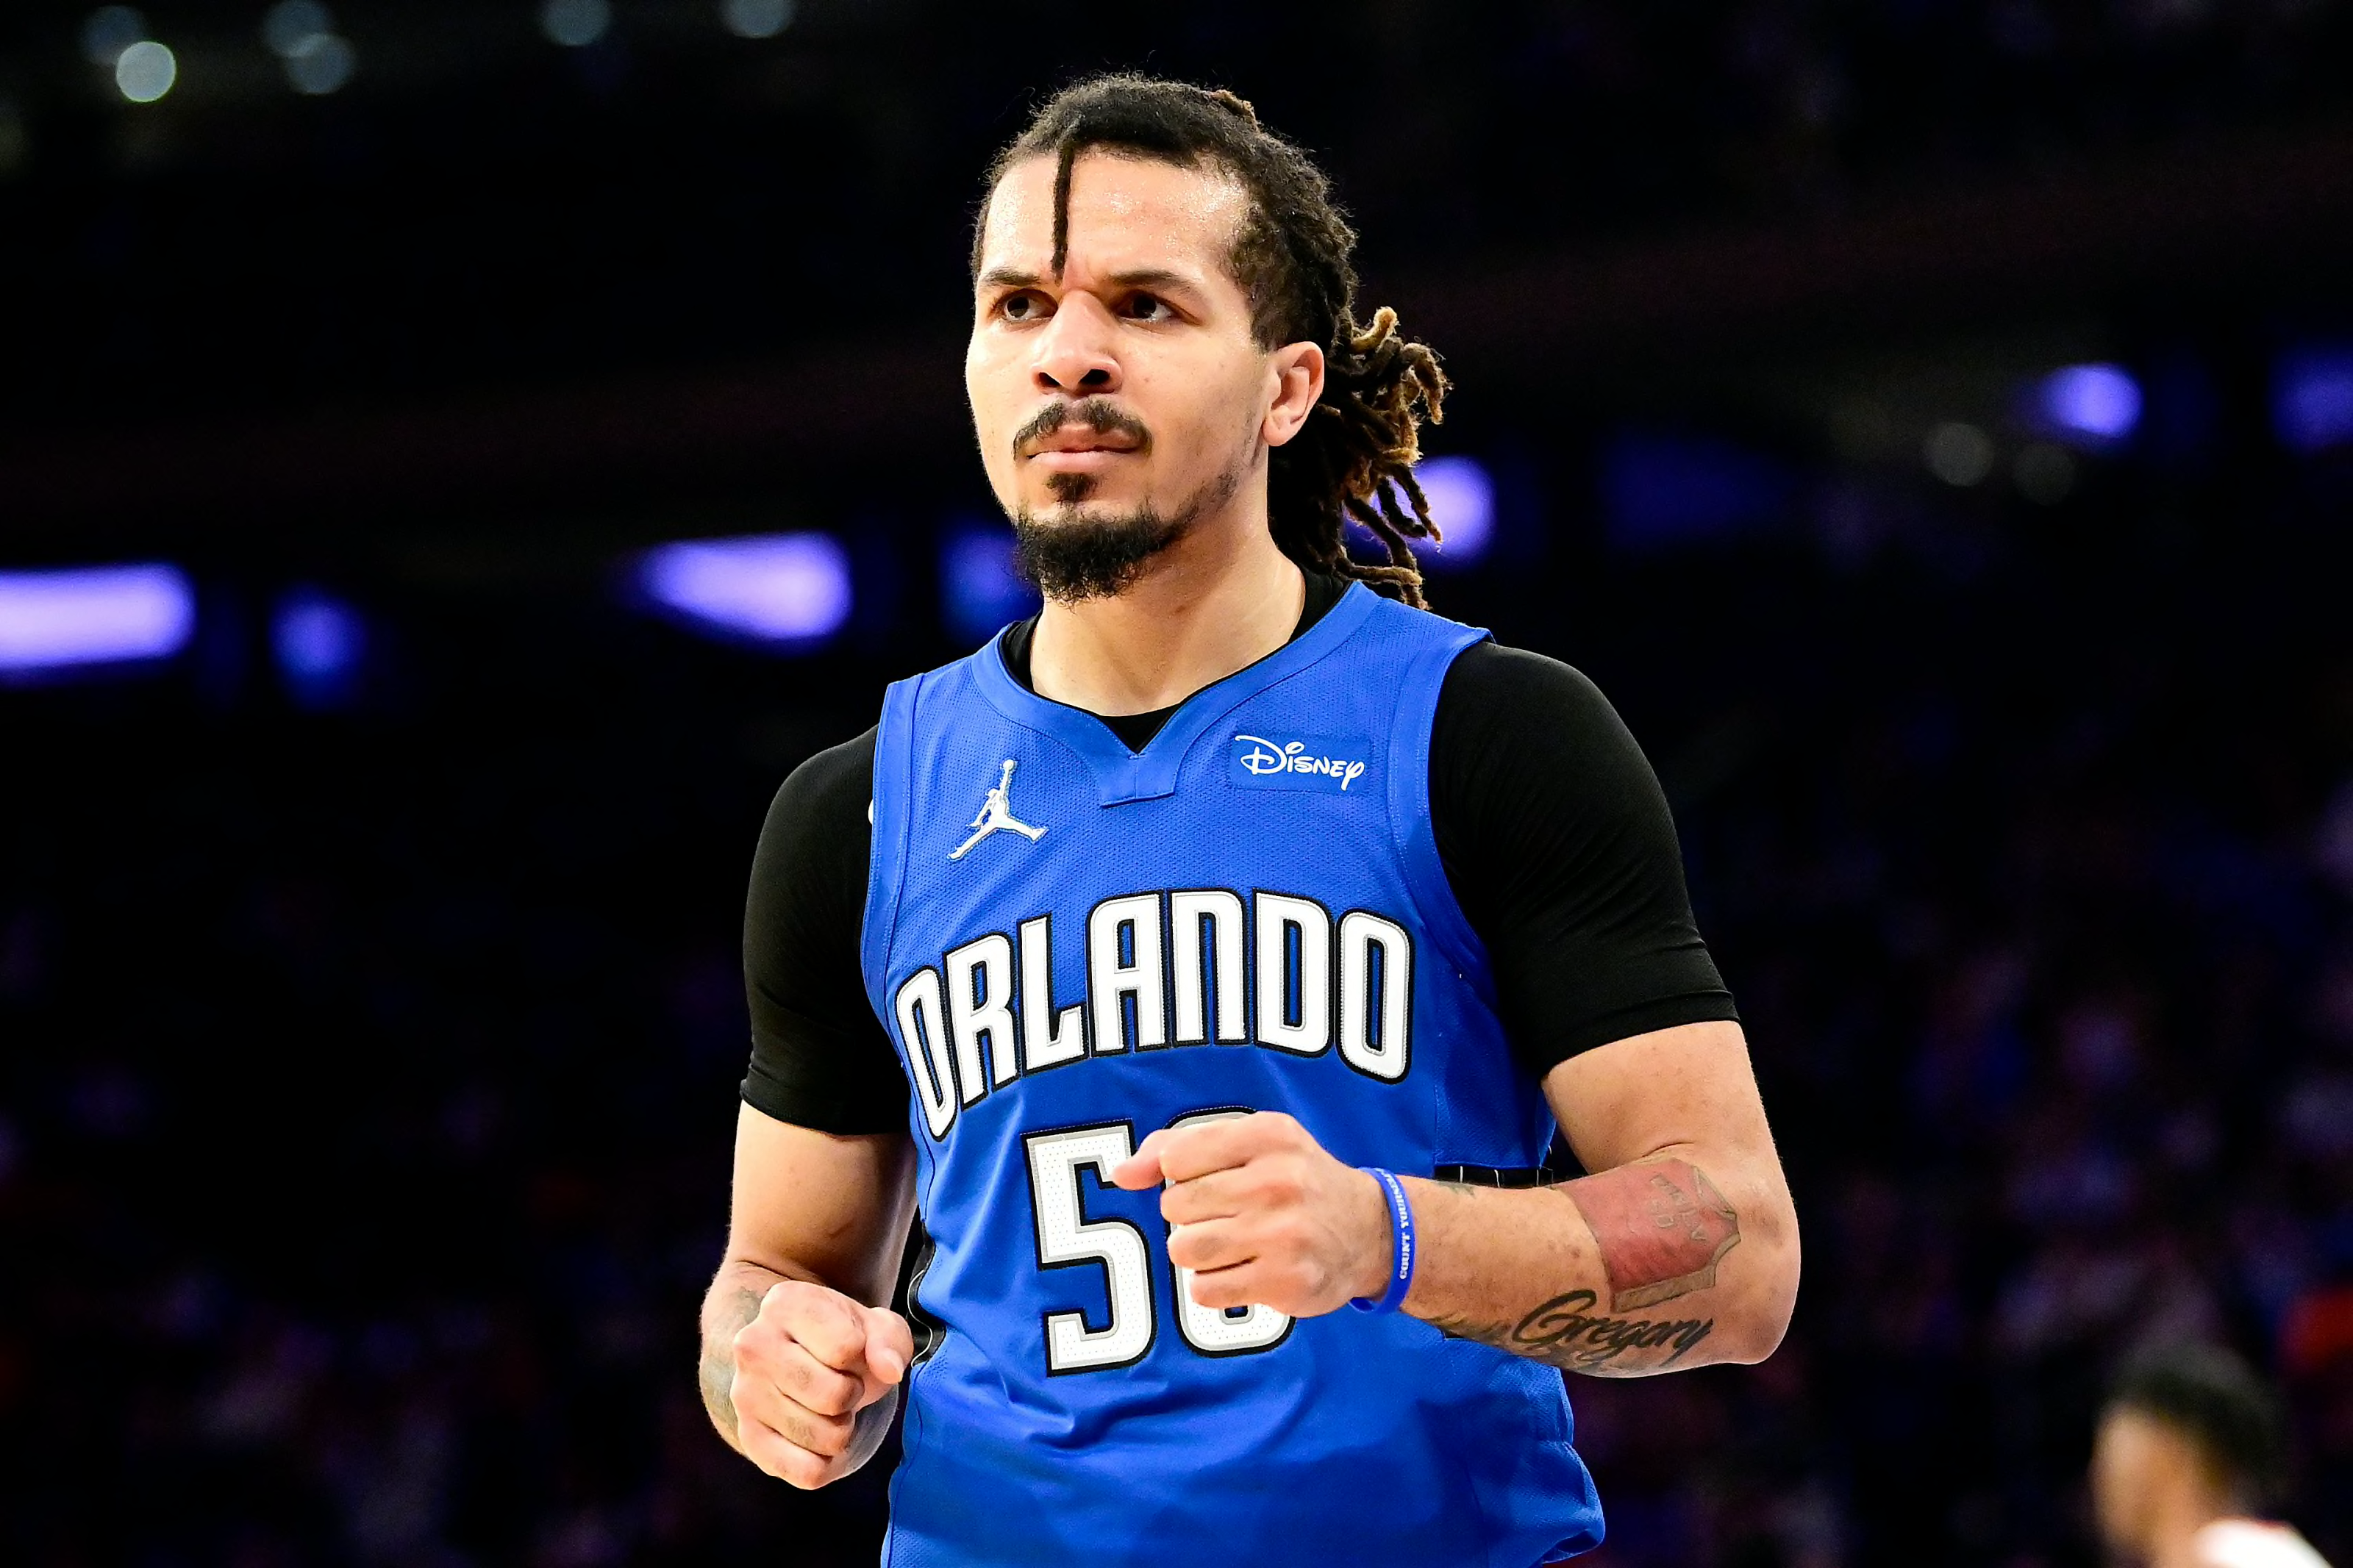 Orlando Magic Guard Cole Anthony Archives - Space Coast Daily